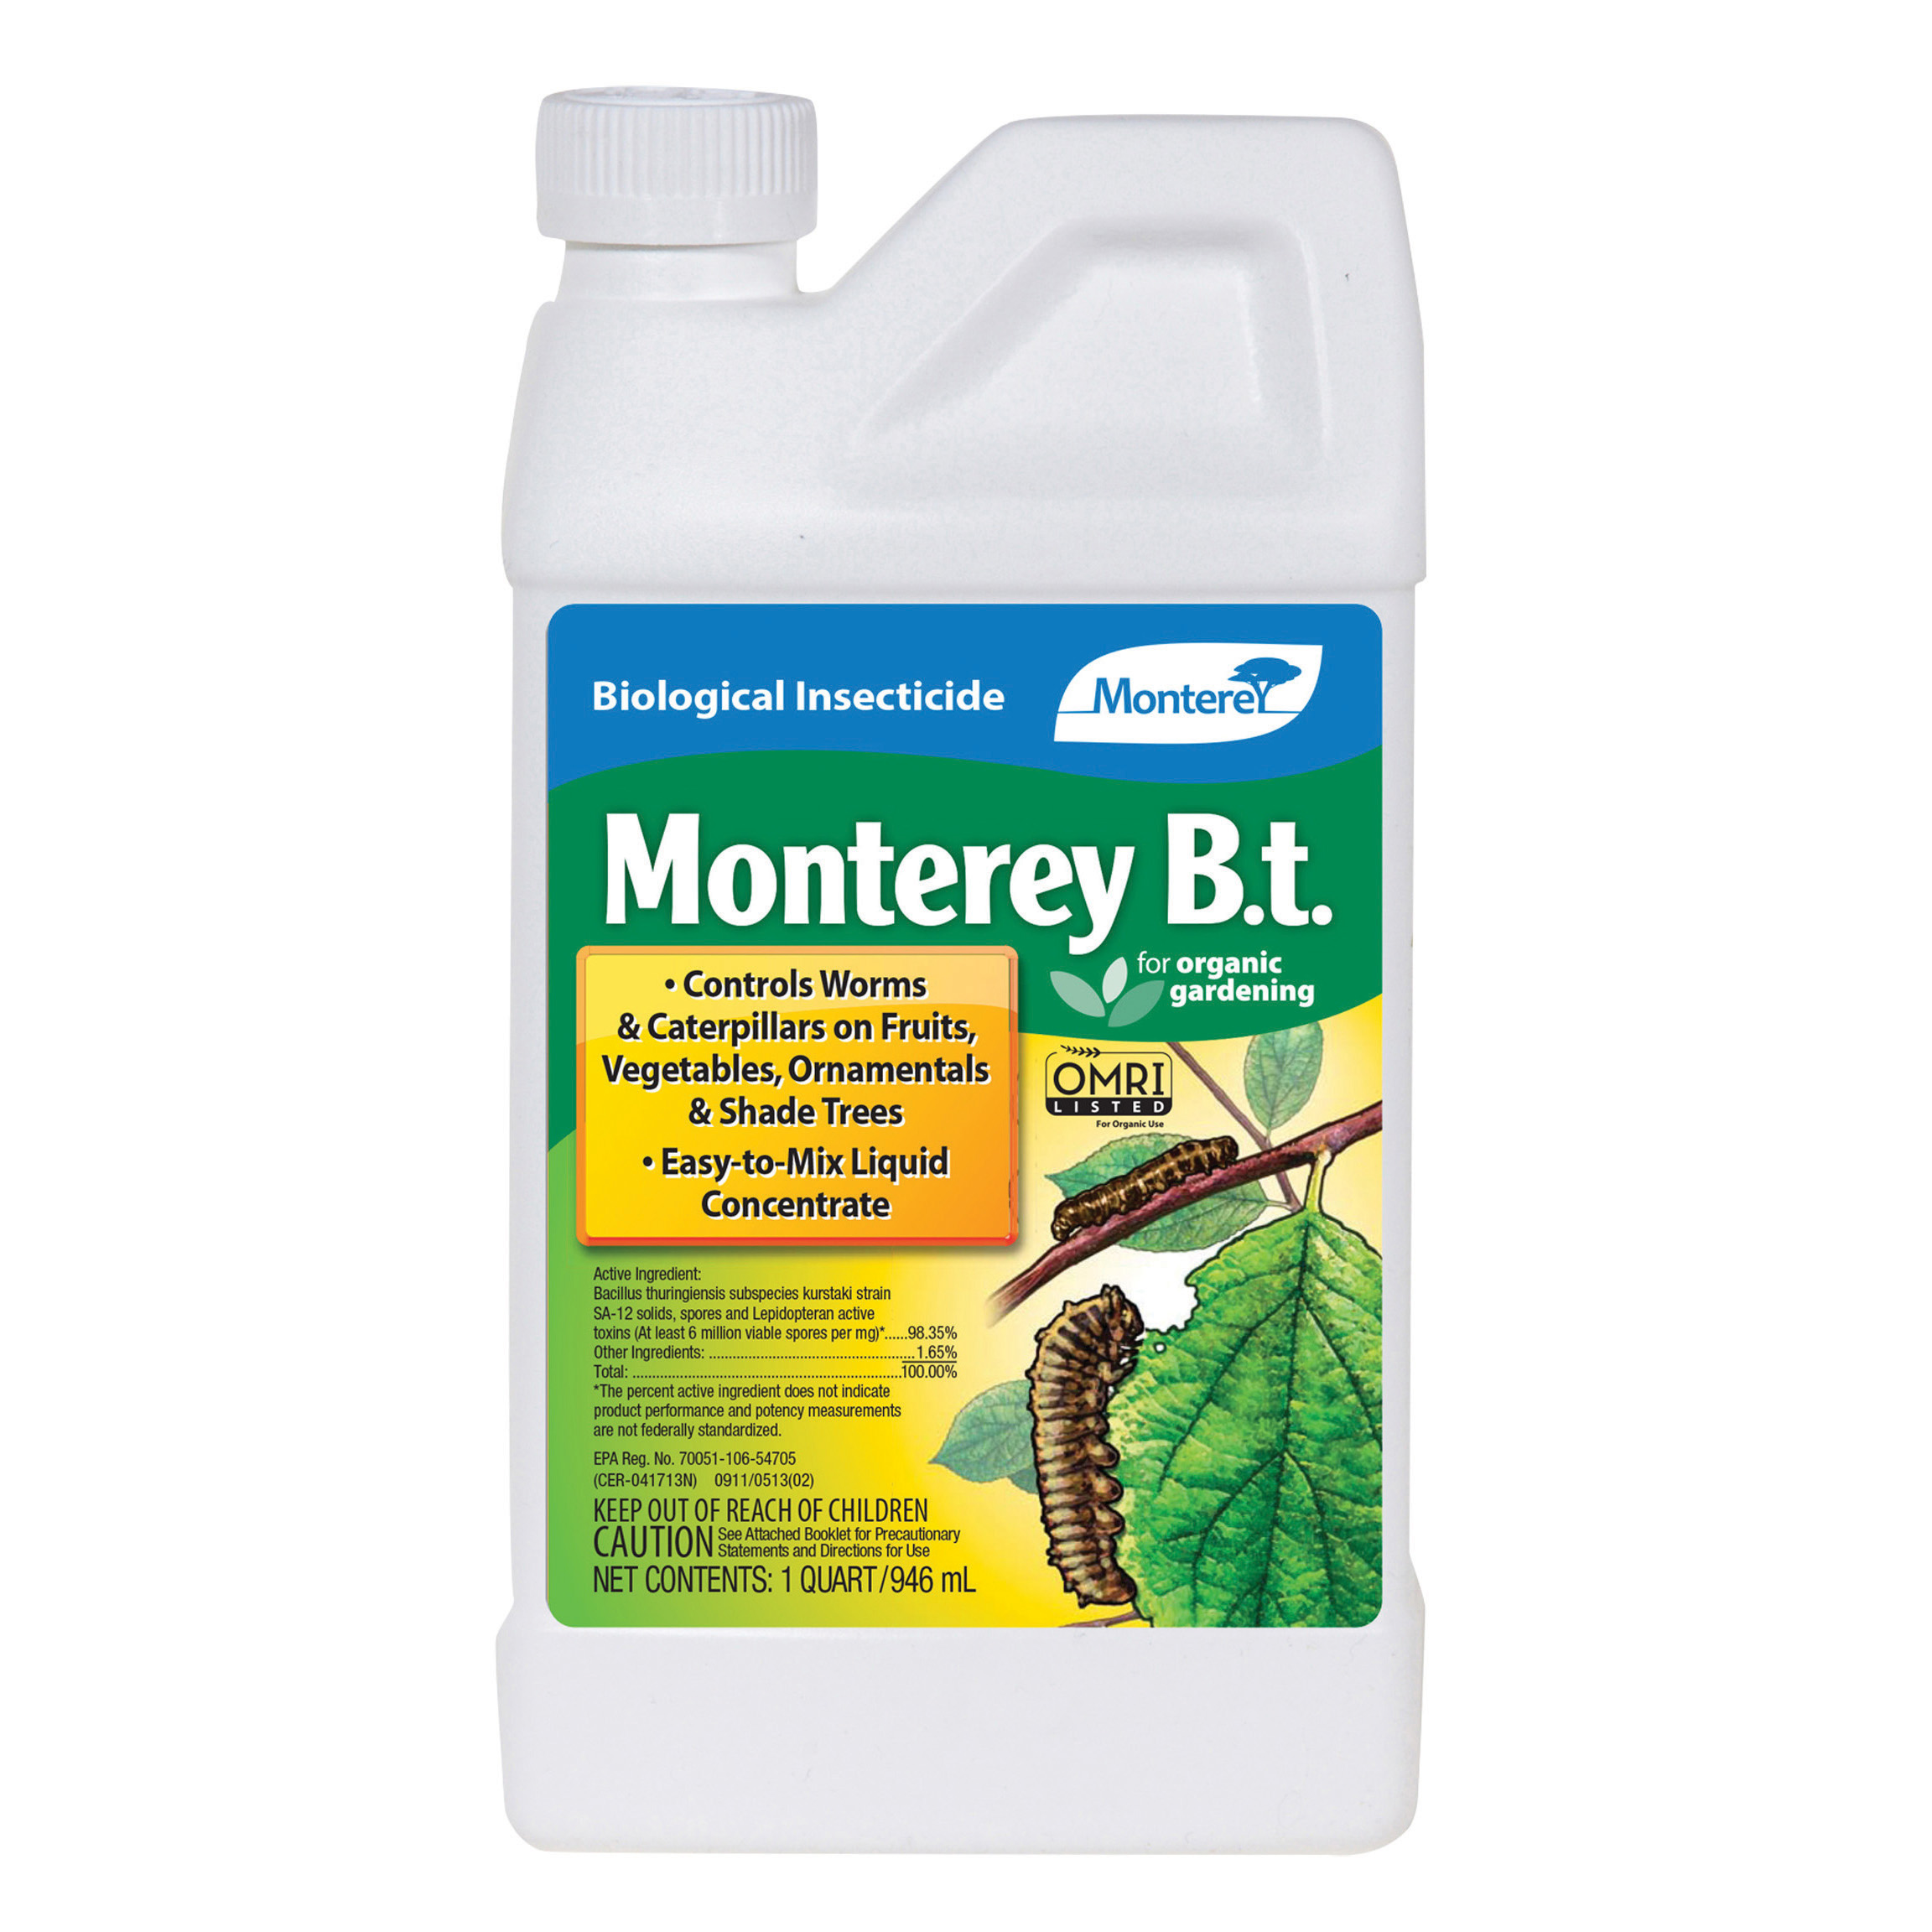 MLGNLG6336 Monterey B.t. Biological Insecticide, 32 oz Concentrate, OMRI